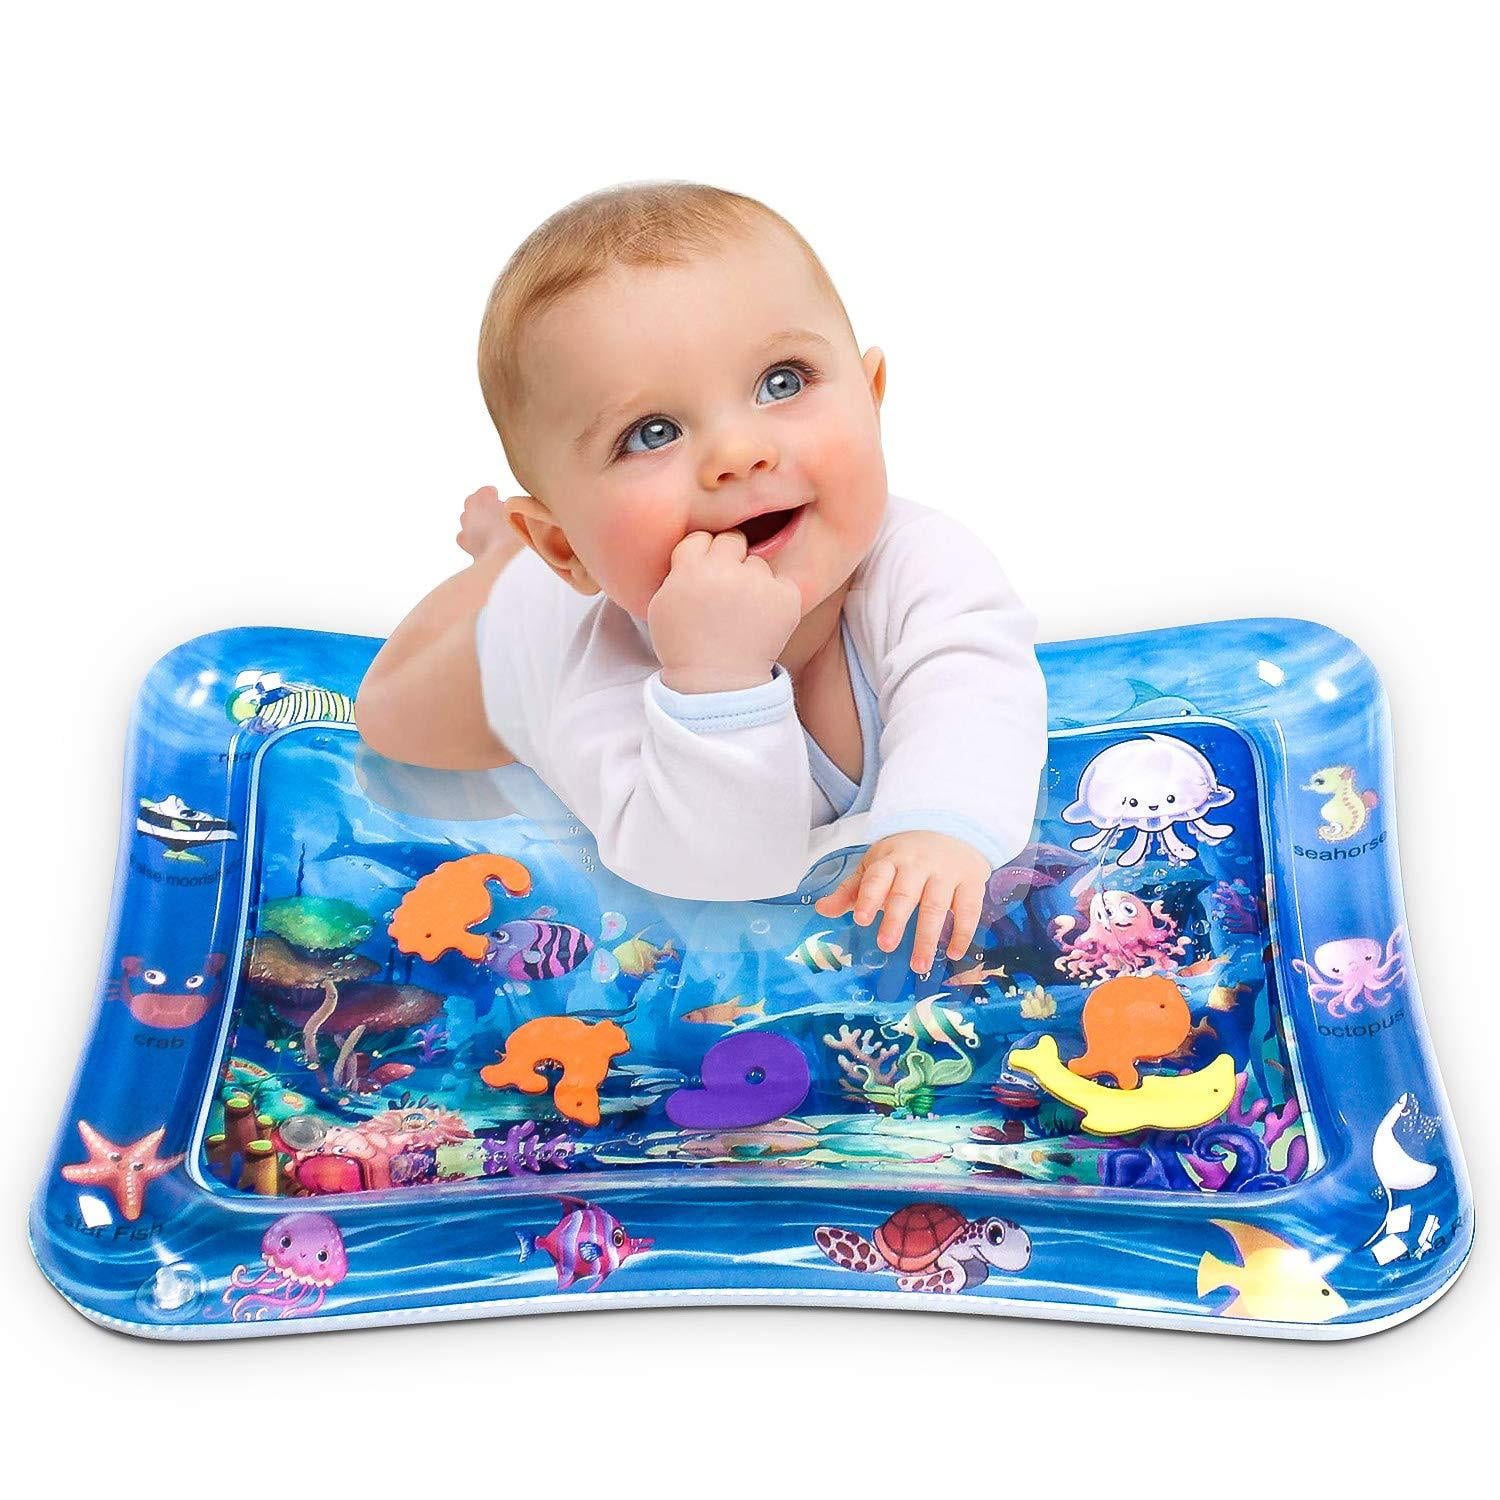 Cute Portable Bouncy Gift for Baby Boys & Girls Coordination Best Infant Toy for Fun Tummy Time & Brain Development Bundaloo Baby Water Play Mat Little Inflatable Activity Center for Strength 